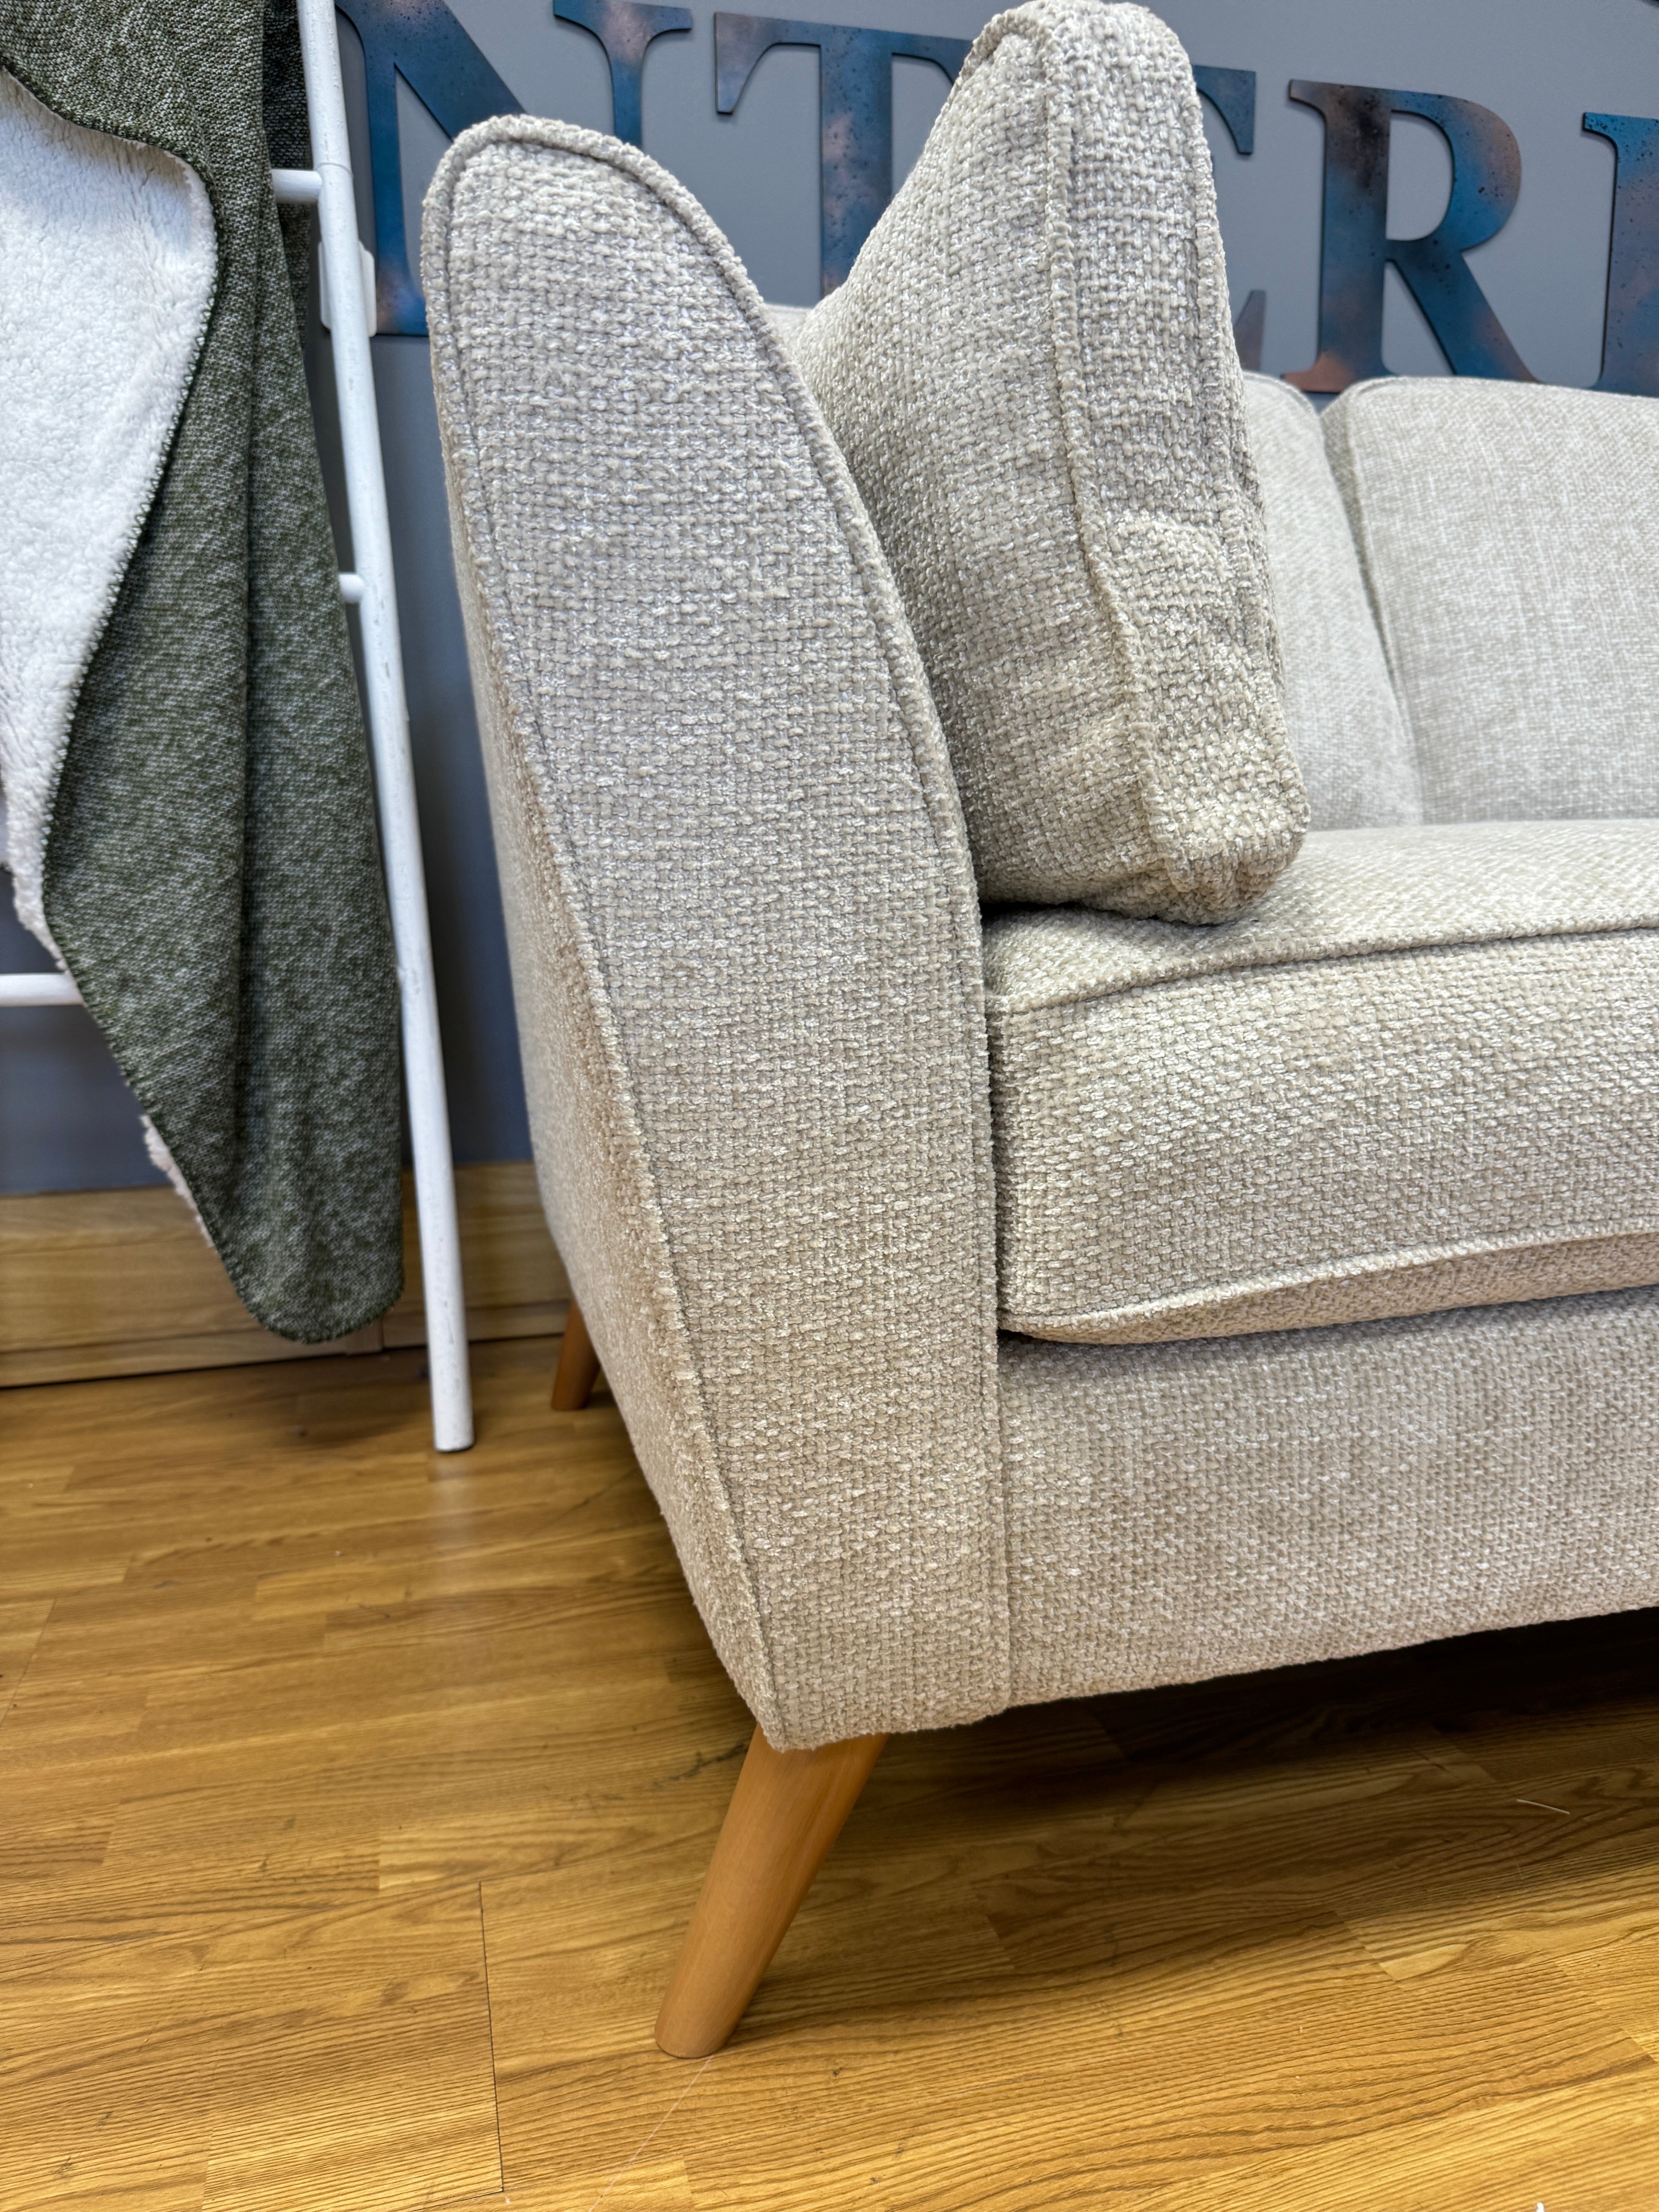 SOFOLOGY TABITHA 2 seater sofa & matching armchair in natural chenille fabric